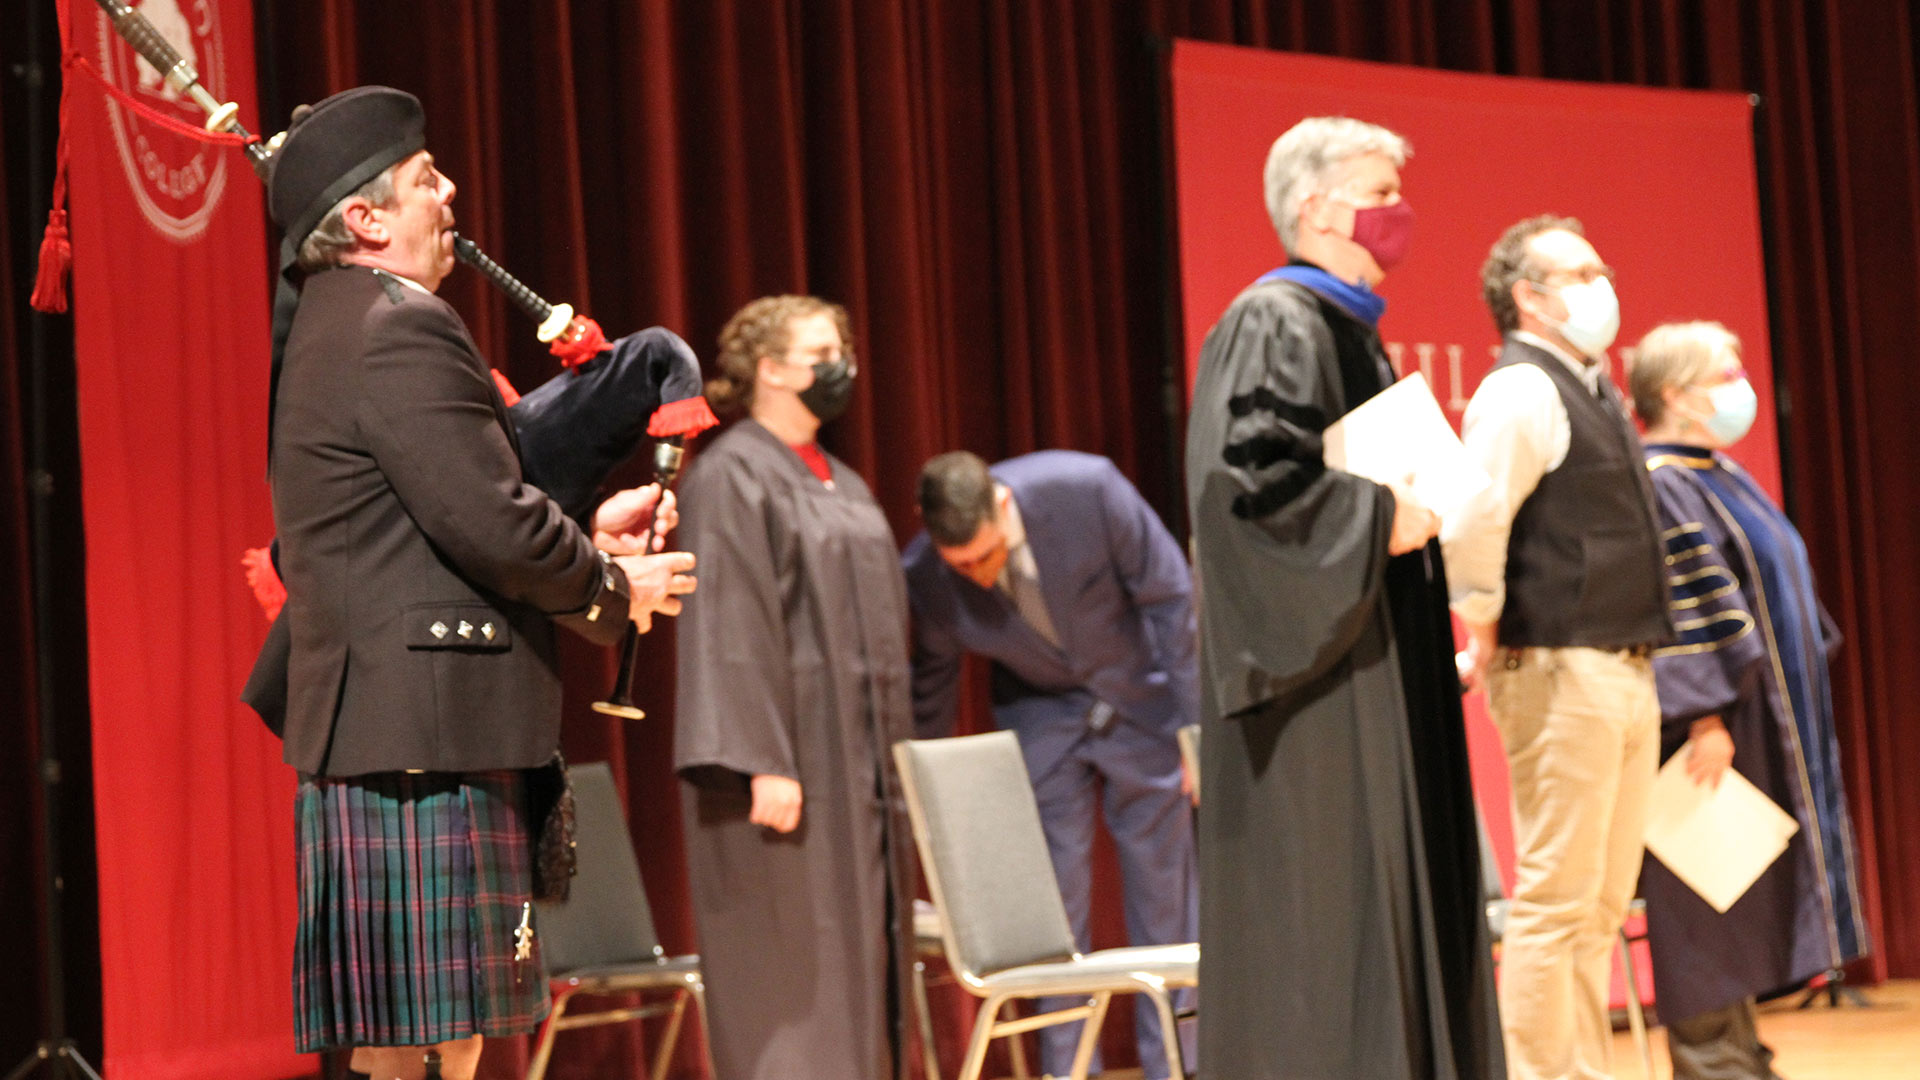 The traditional bagpiper plays on stage, standing beside the Convocation speakers.